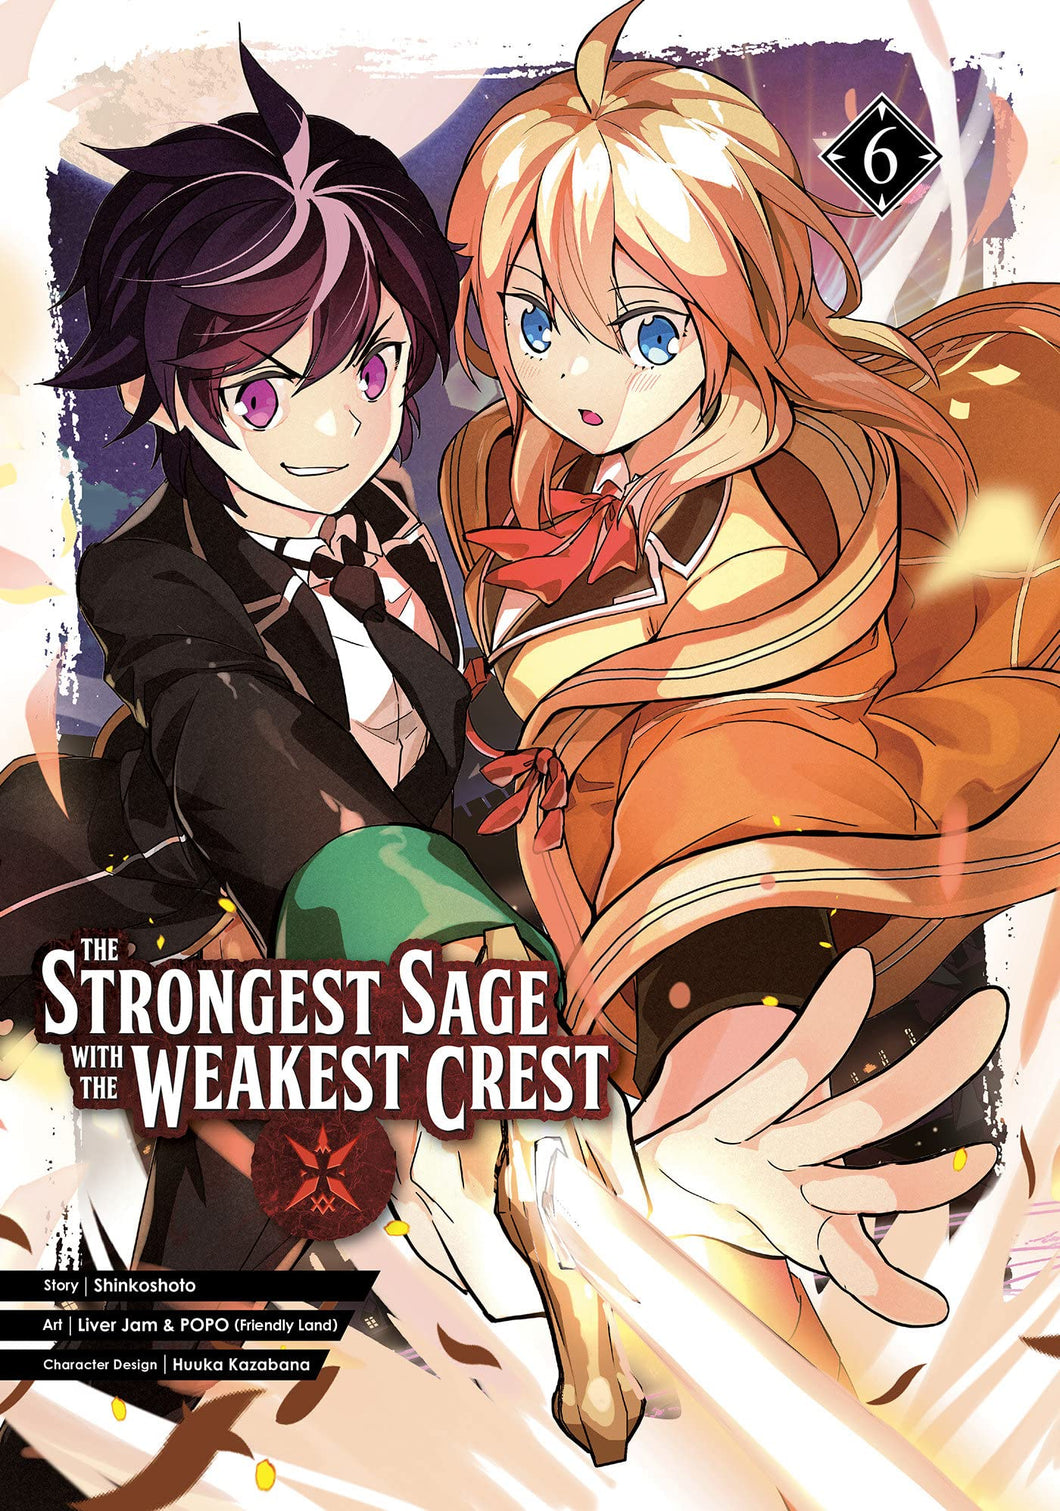 The Strongest Sage with the Weakest Crest Volume 6